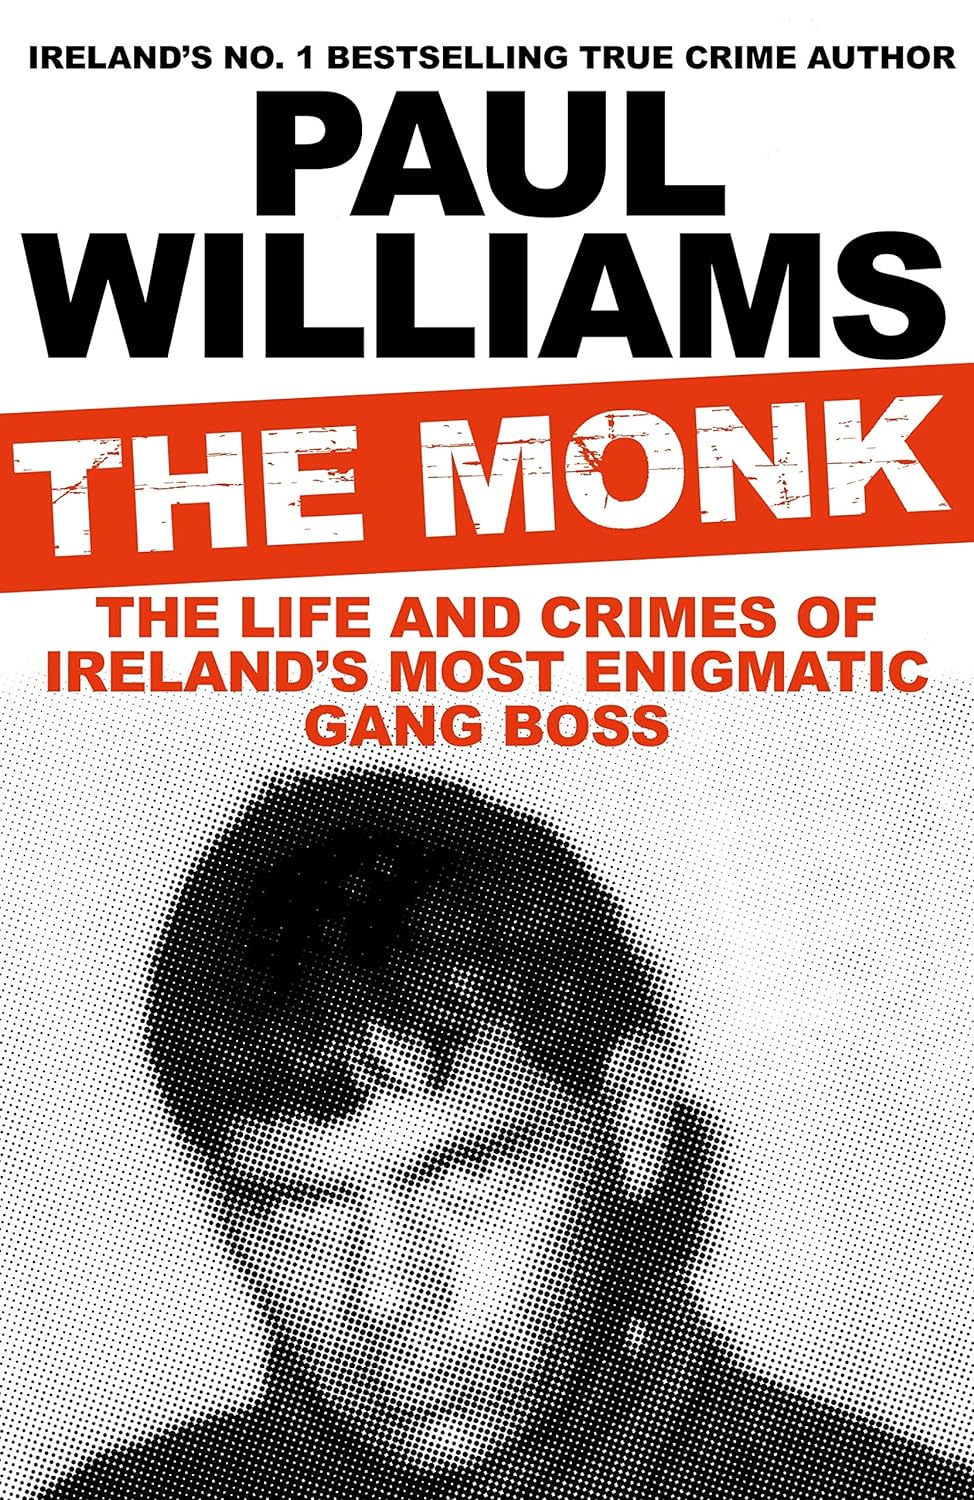 The Monk: The Life and Crimes of Ireland's Most Enigmatic Gang Boss, by Paul Williams